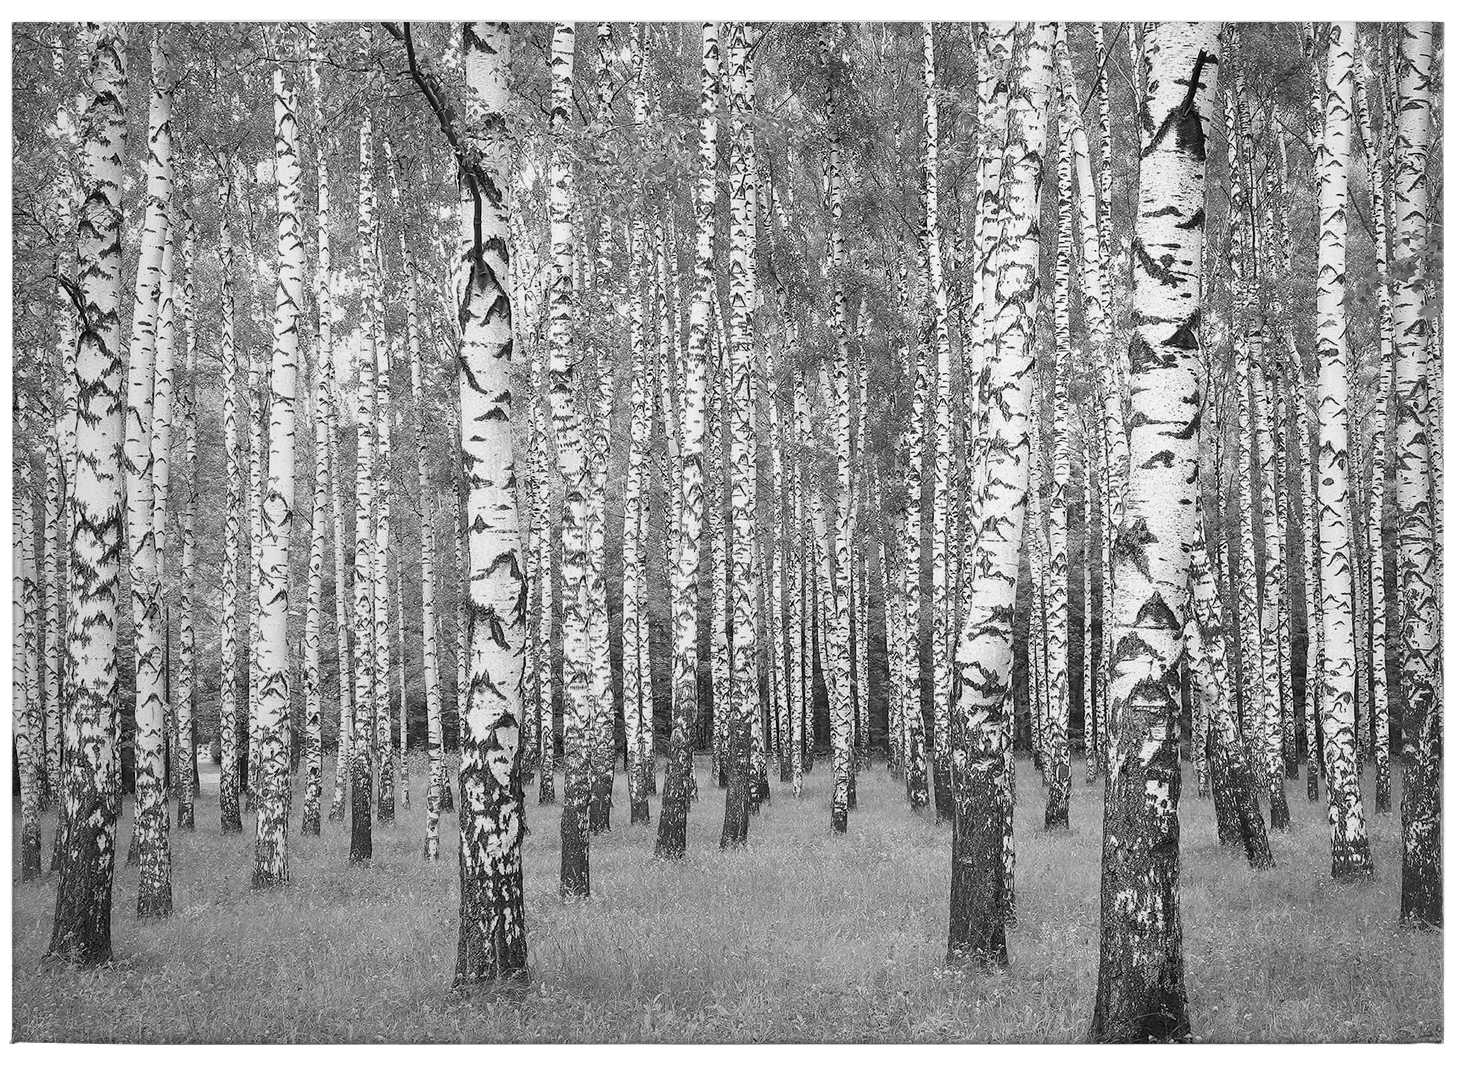             Birch forest canvas print black and white
        